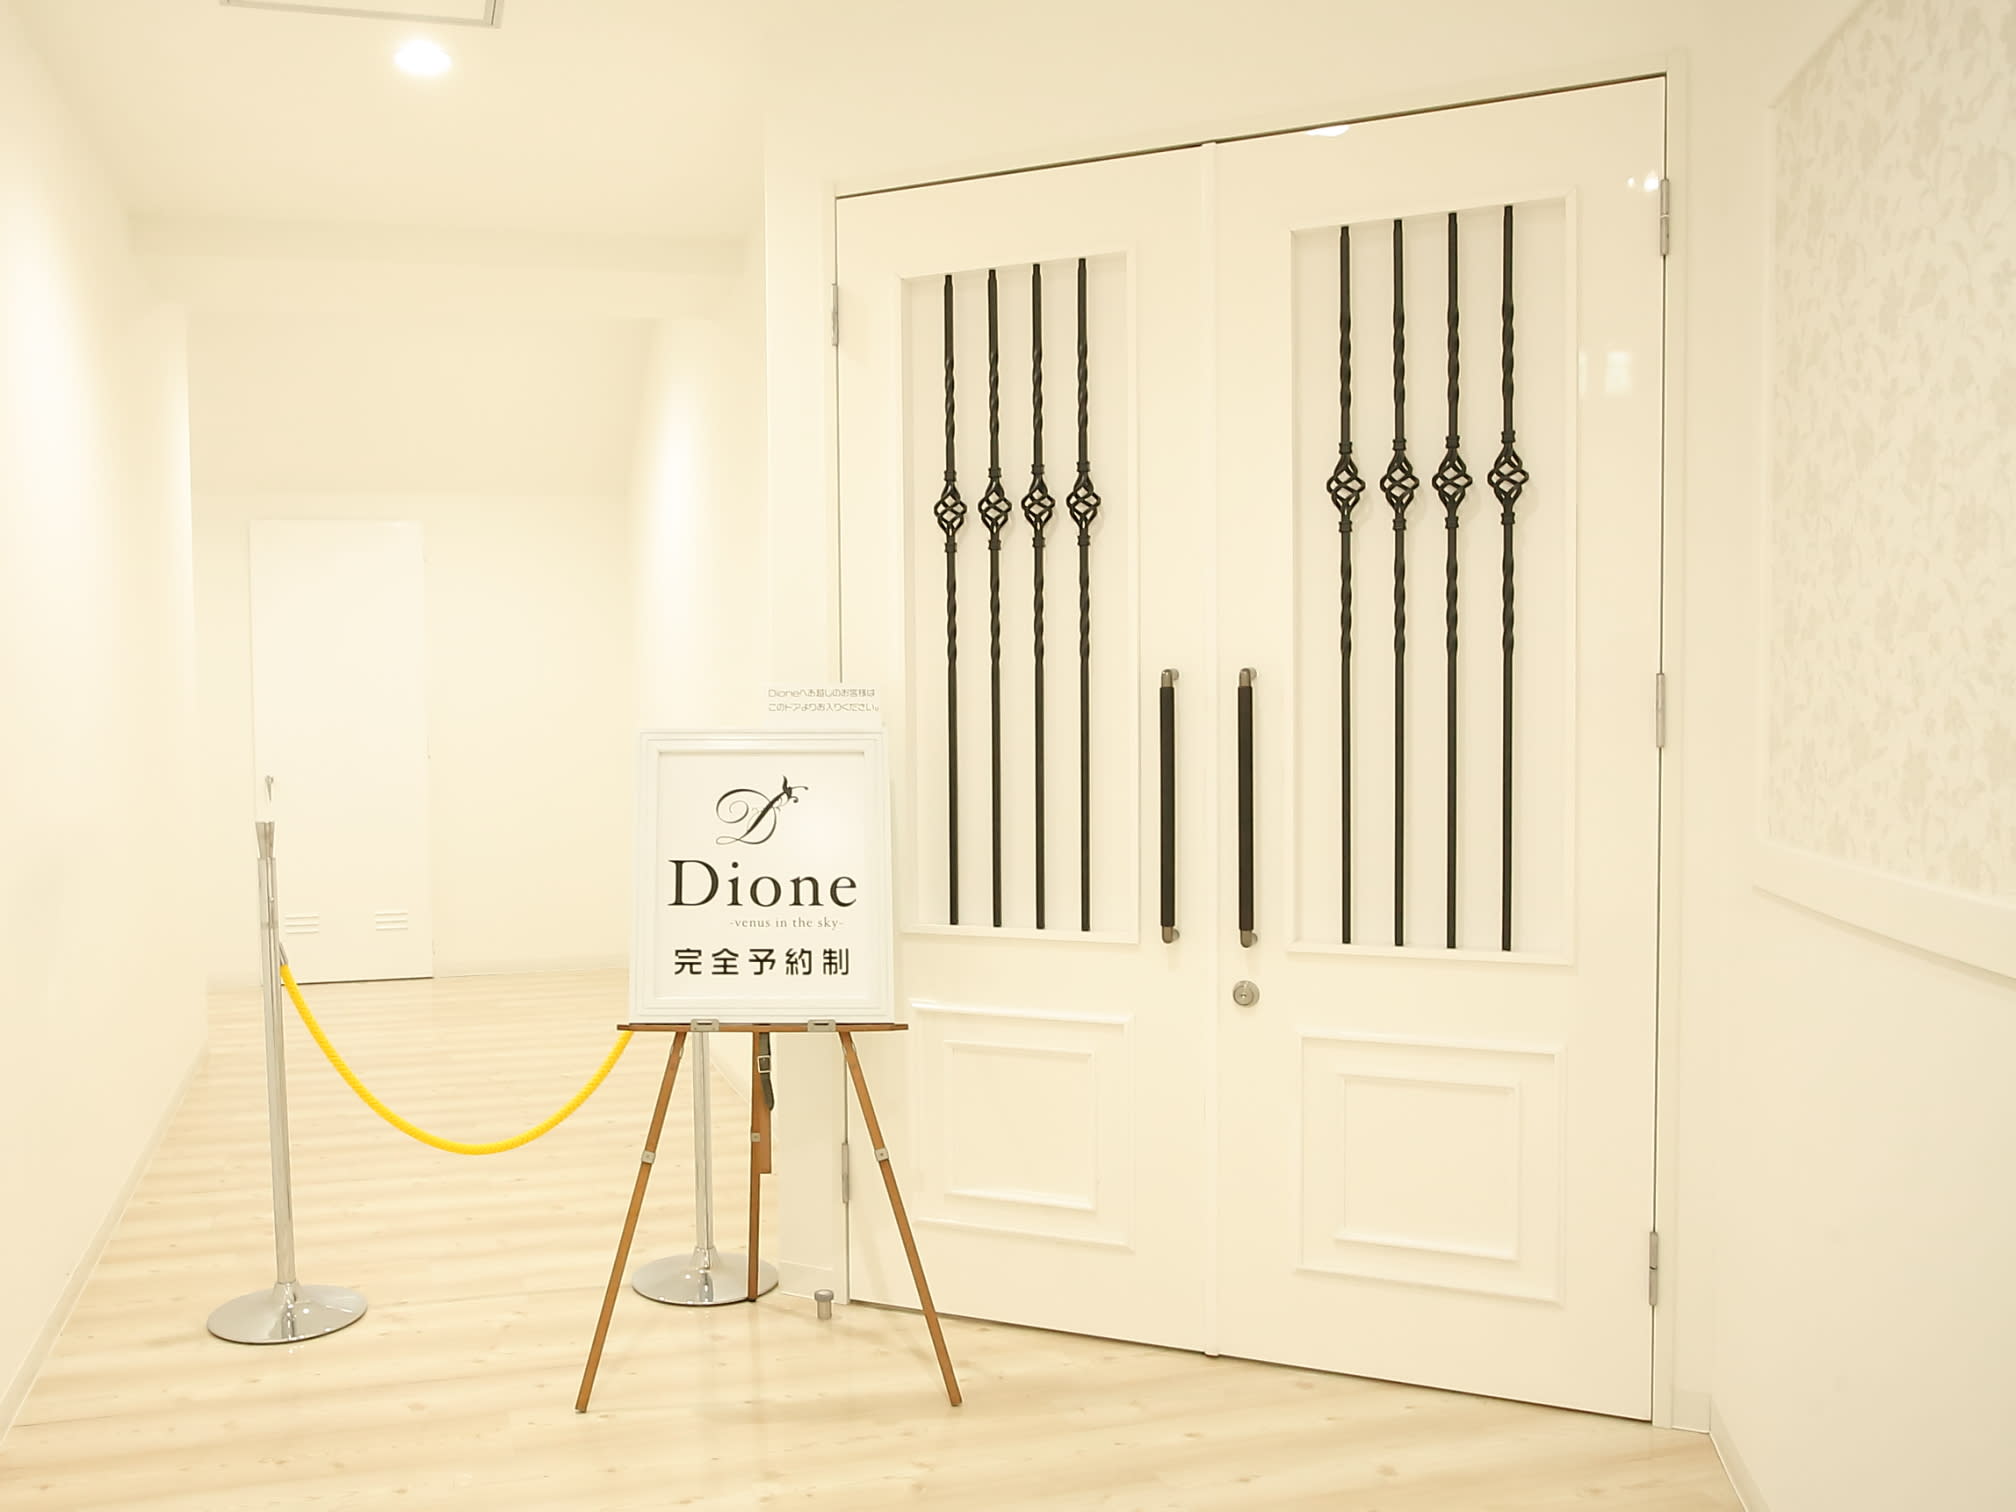 Dione 多治見店のアイキャッチ画像